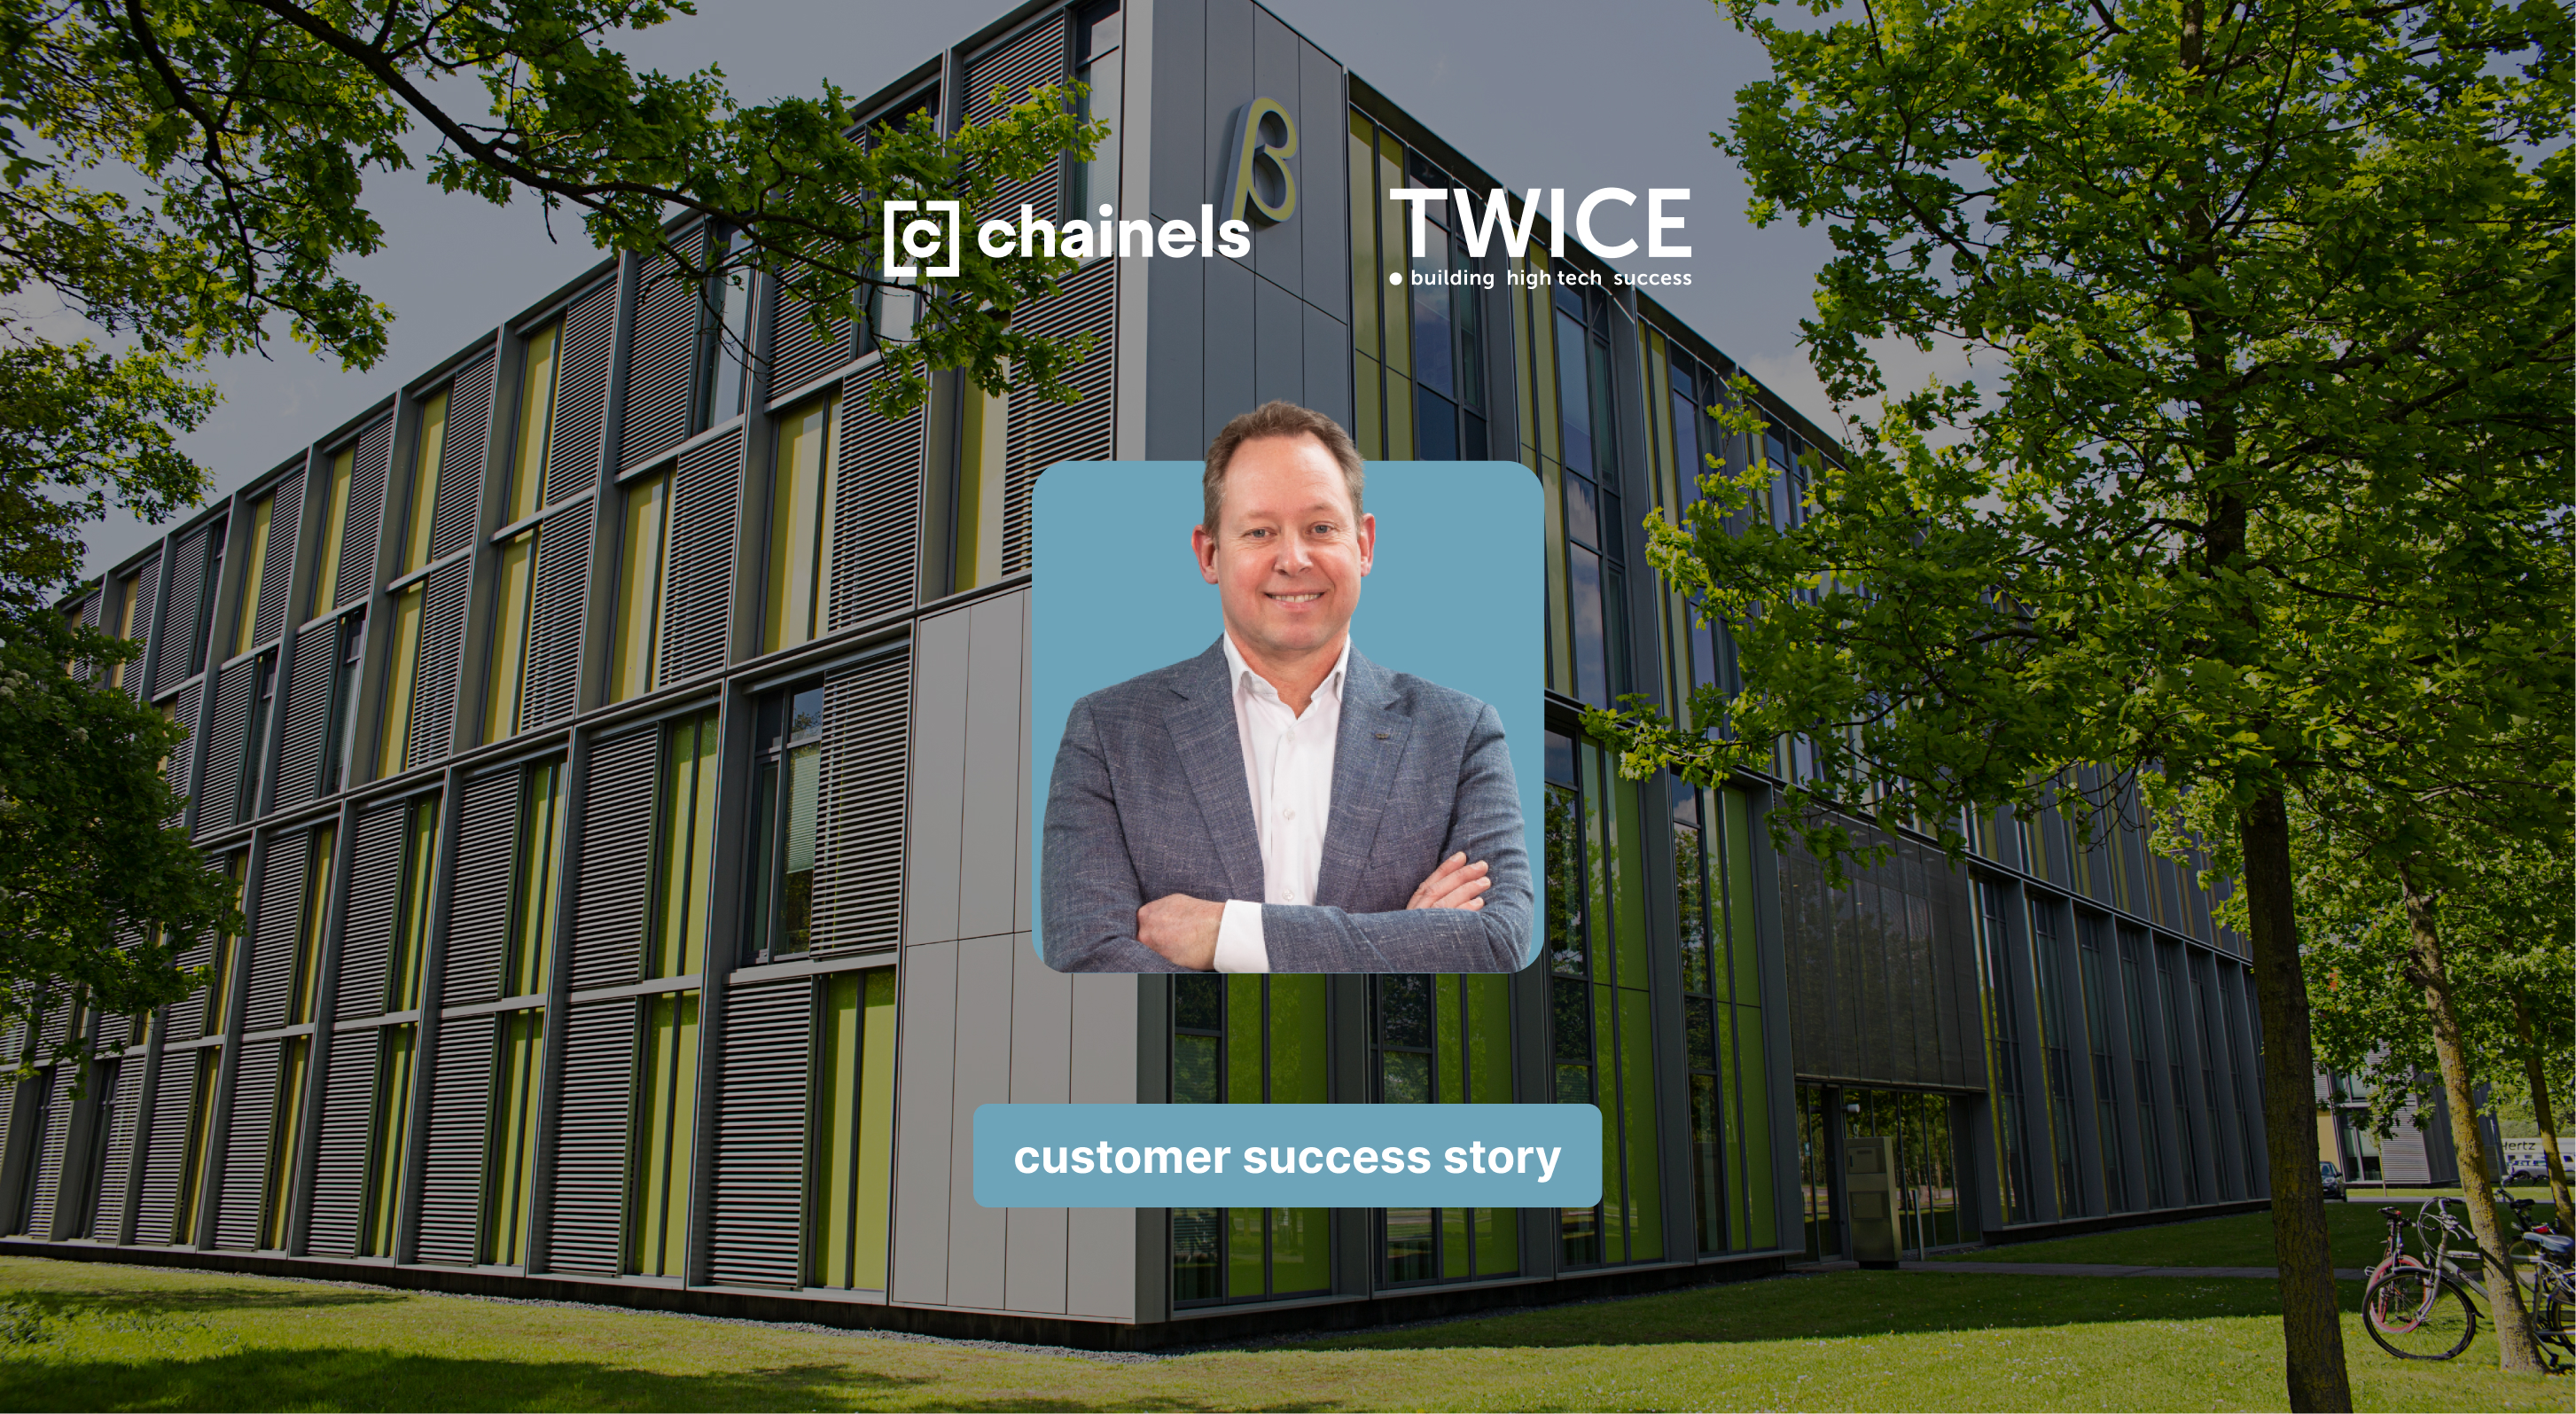 Modern building in background, Chainels and Twice's logo in foreground with headshot of person crossing arms. 